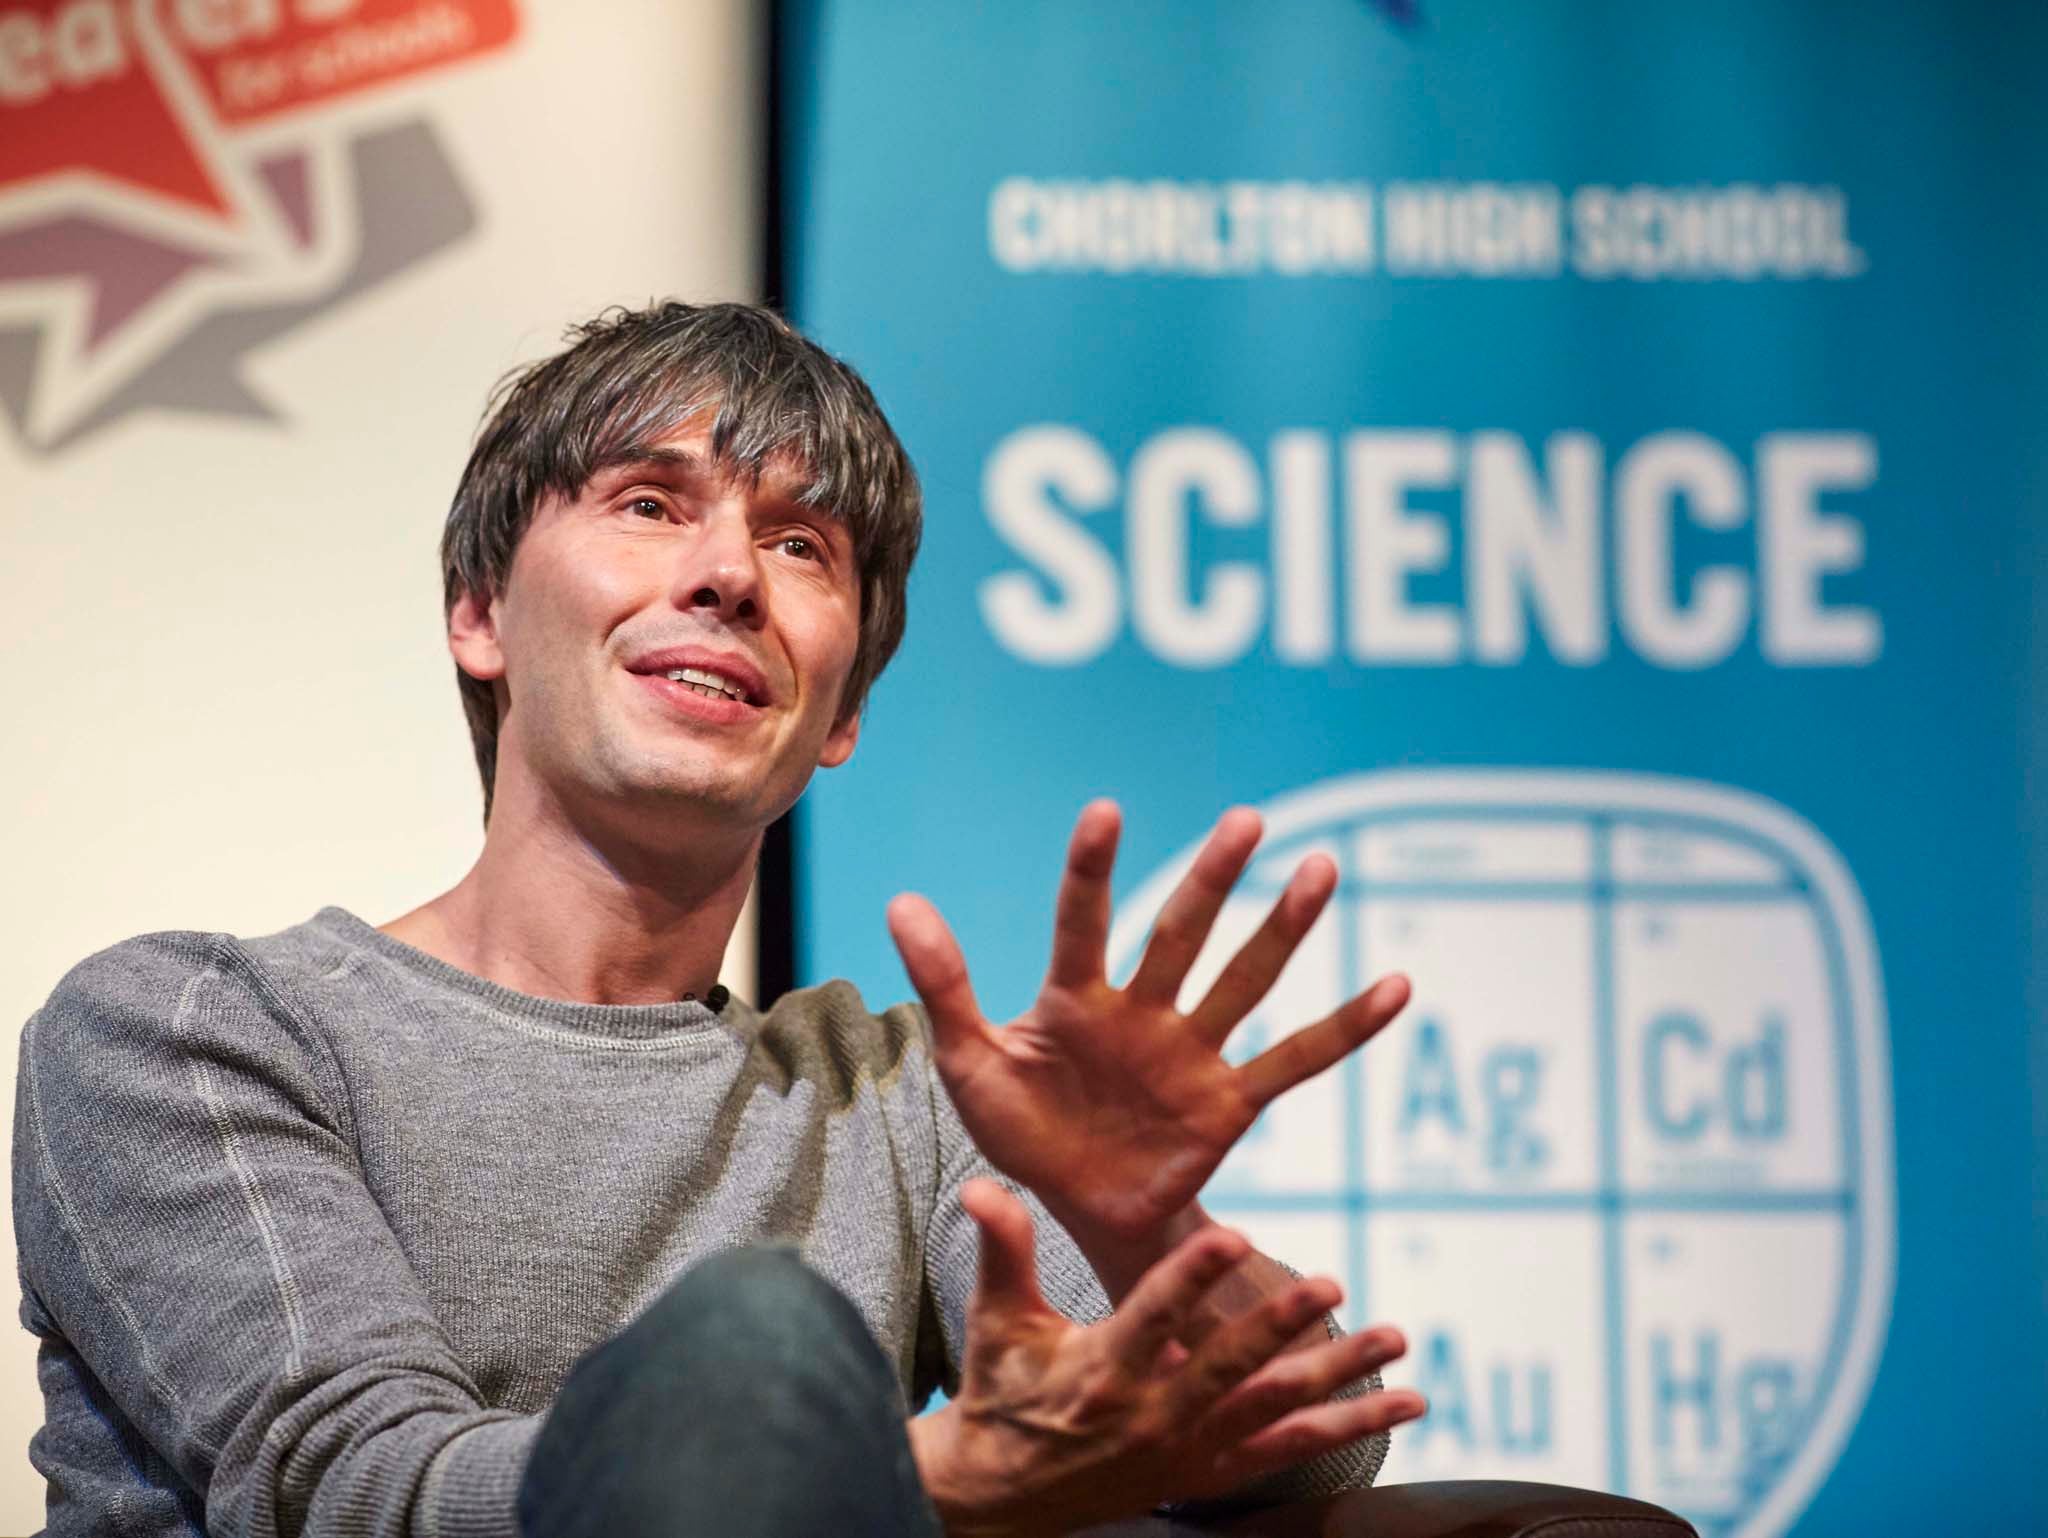 Professor Brian Cox speaking after a talk on the future of scientific discovery in Manchester